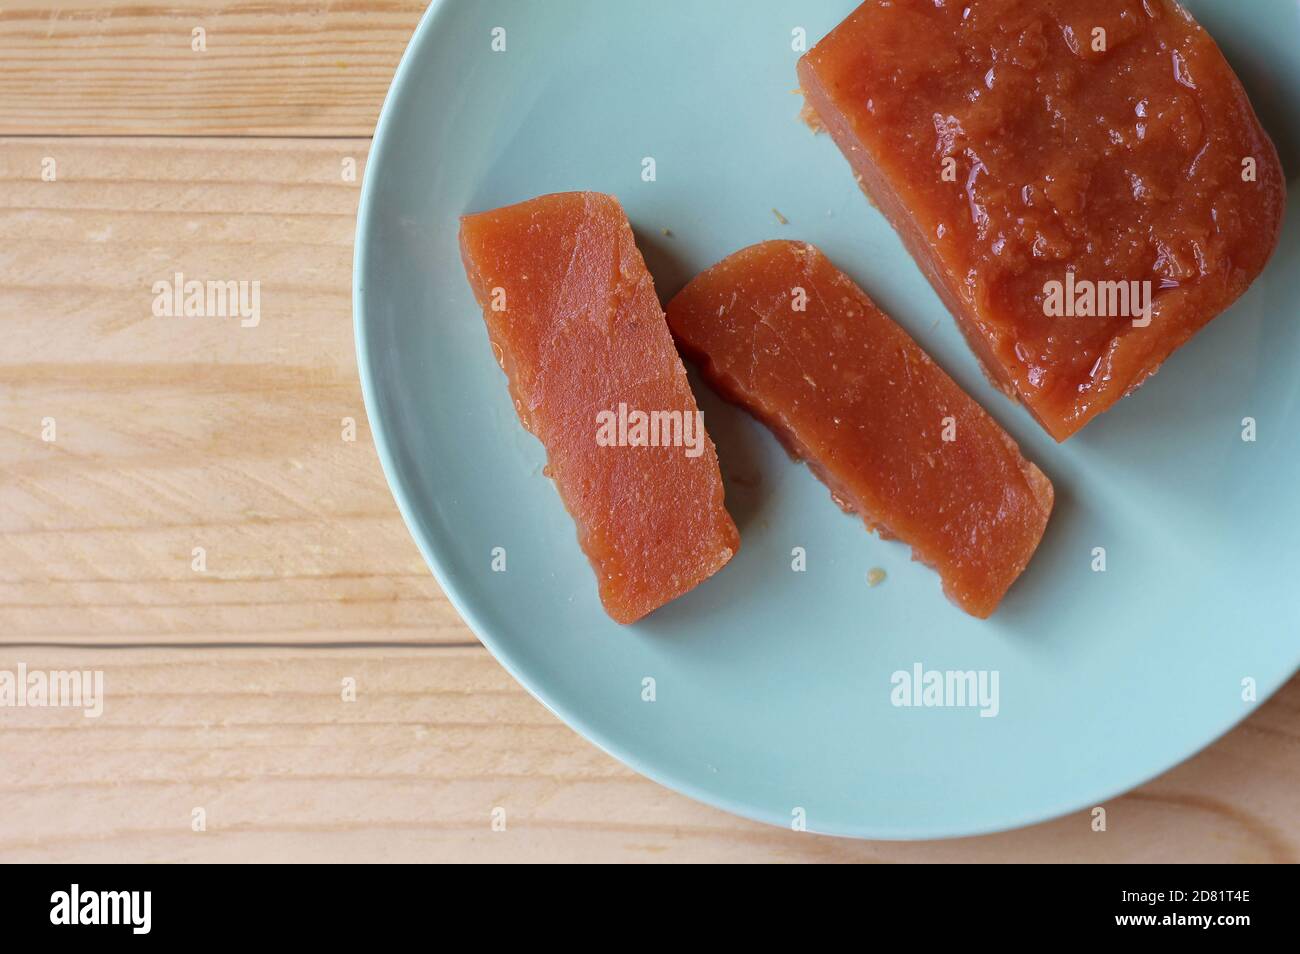 Top down view of home made Quince paste: Dulce de Membrillo. Sliced on a green plate on a wooden table, with copyspace to left. A sweet treat which is Stock Photo